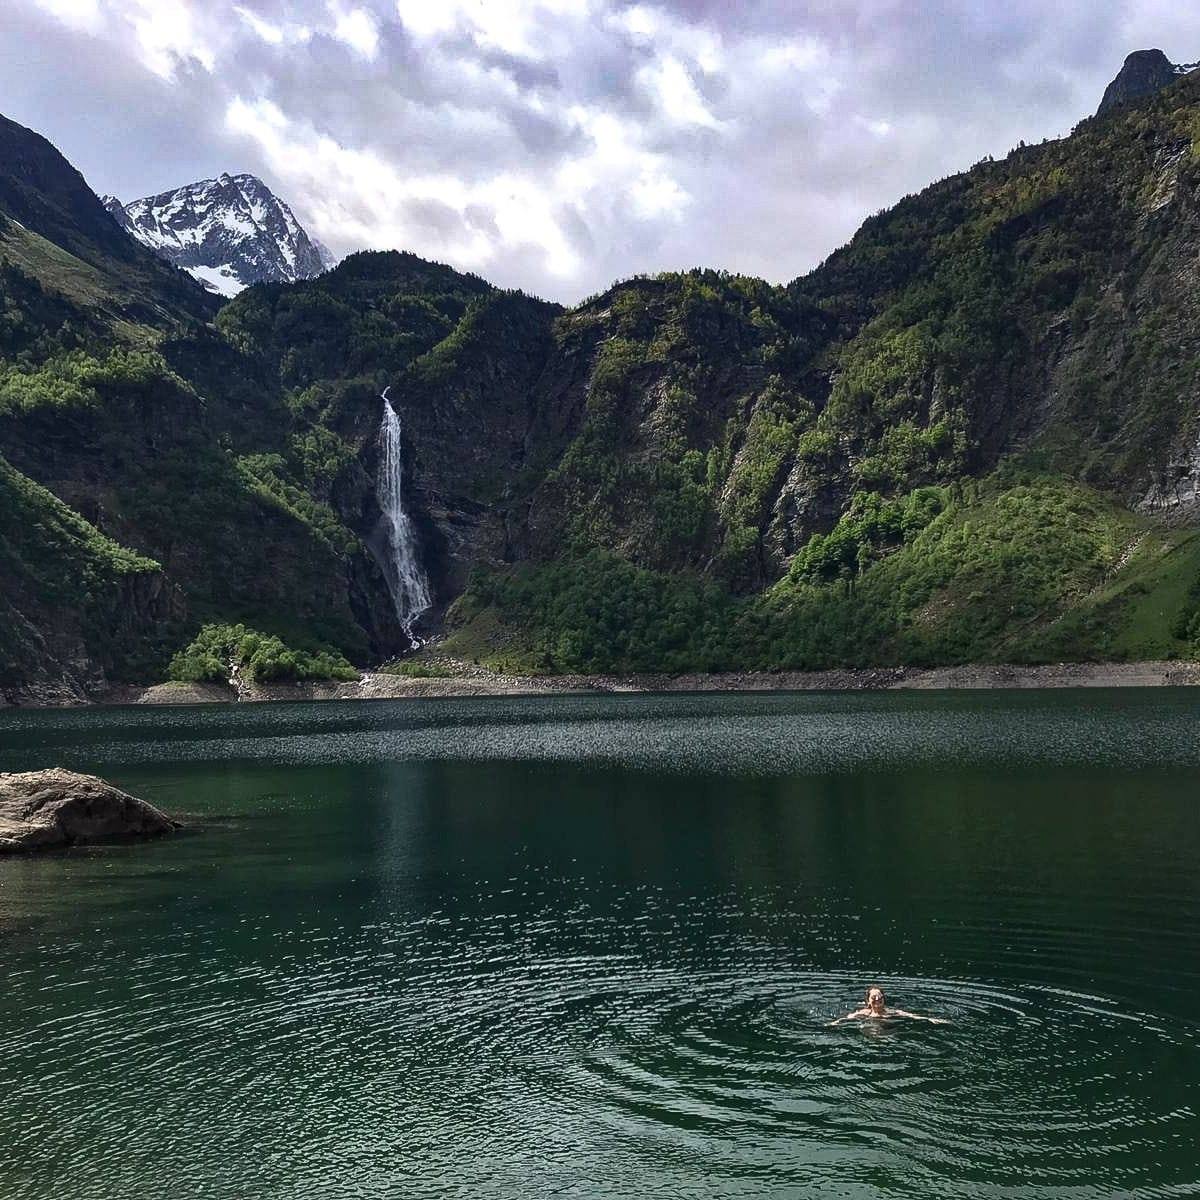 Wild Swimming in Lac D’ Oo: An adventure in The Pyrenees